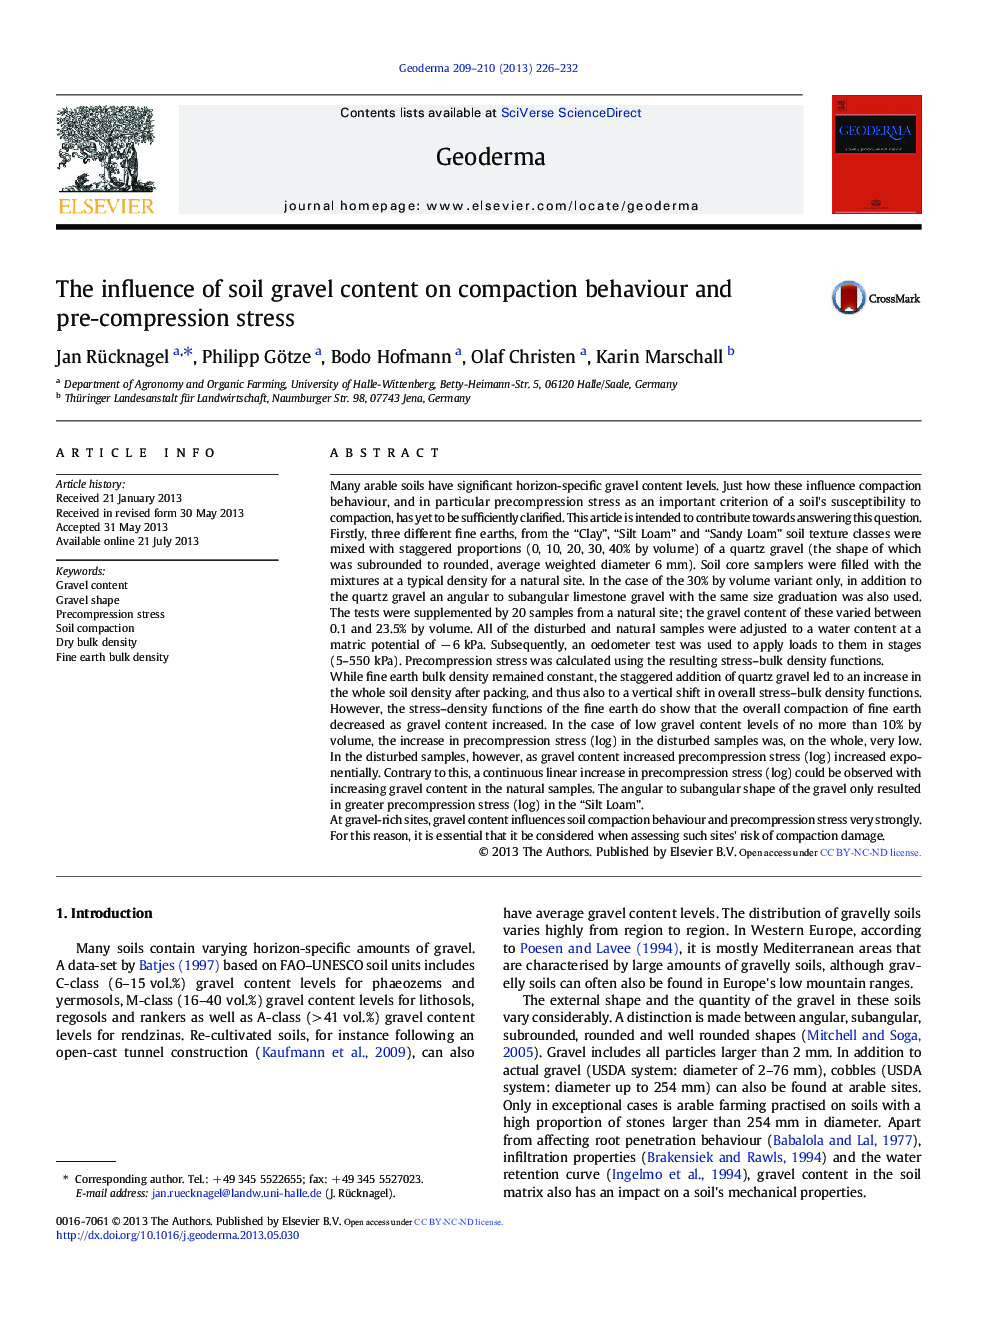 The influence of soil gravel content on compaction behaviour and pre-compression stress